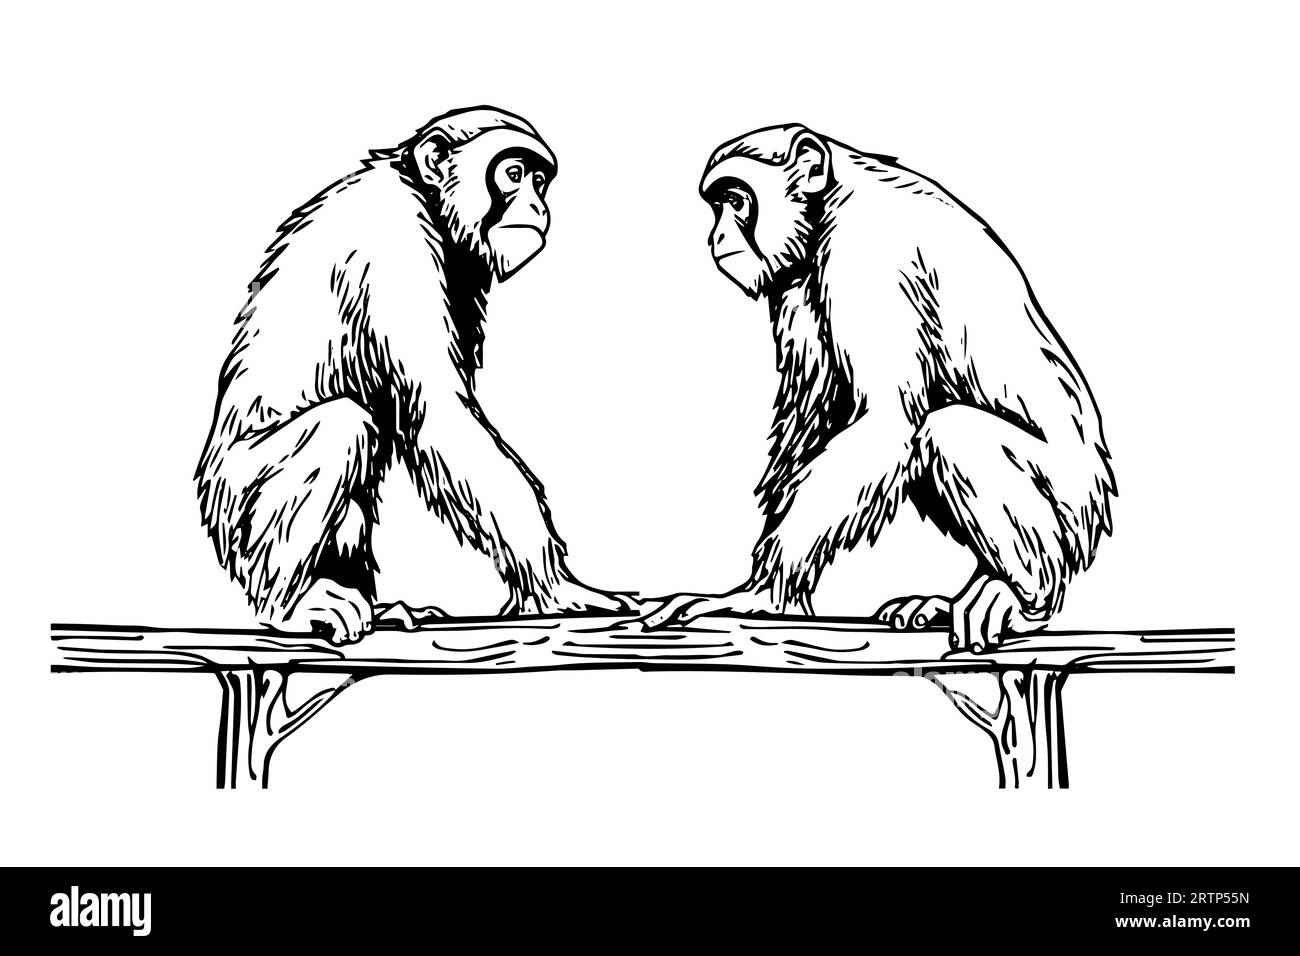 Two monkeys sitting on a branch. Ink sketch engraving vector illustration. Stock Vector